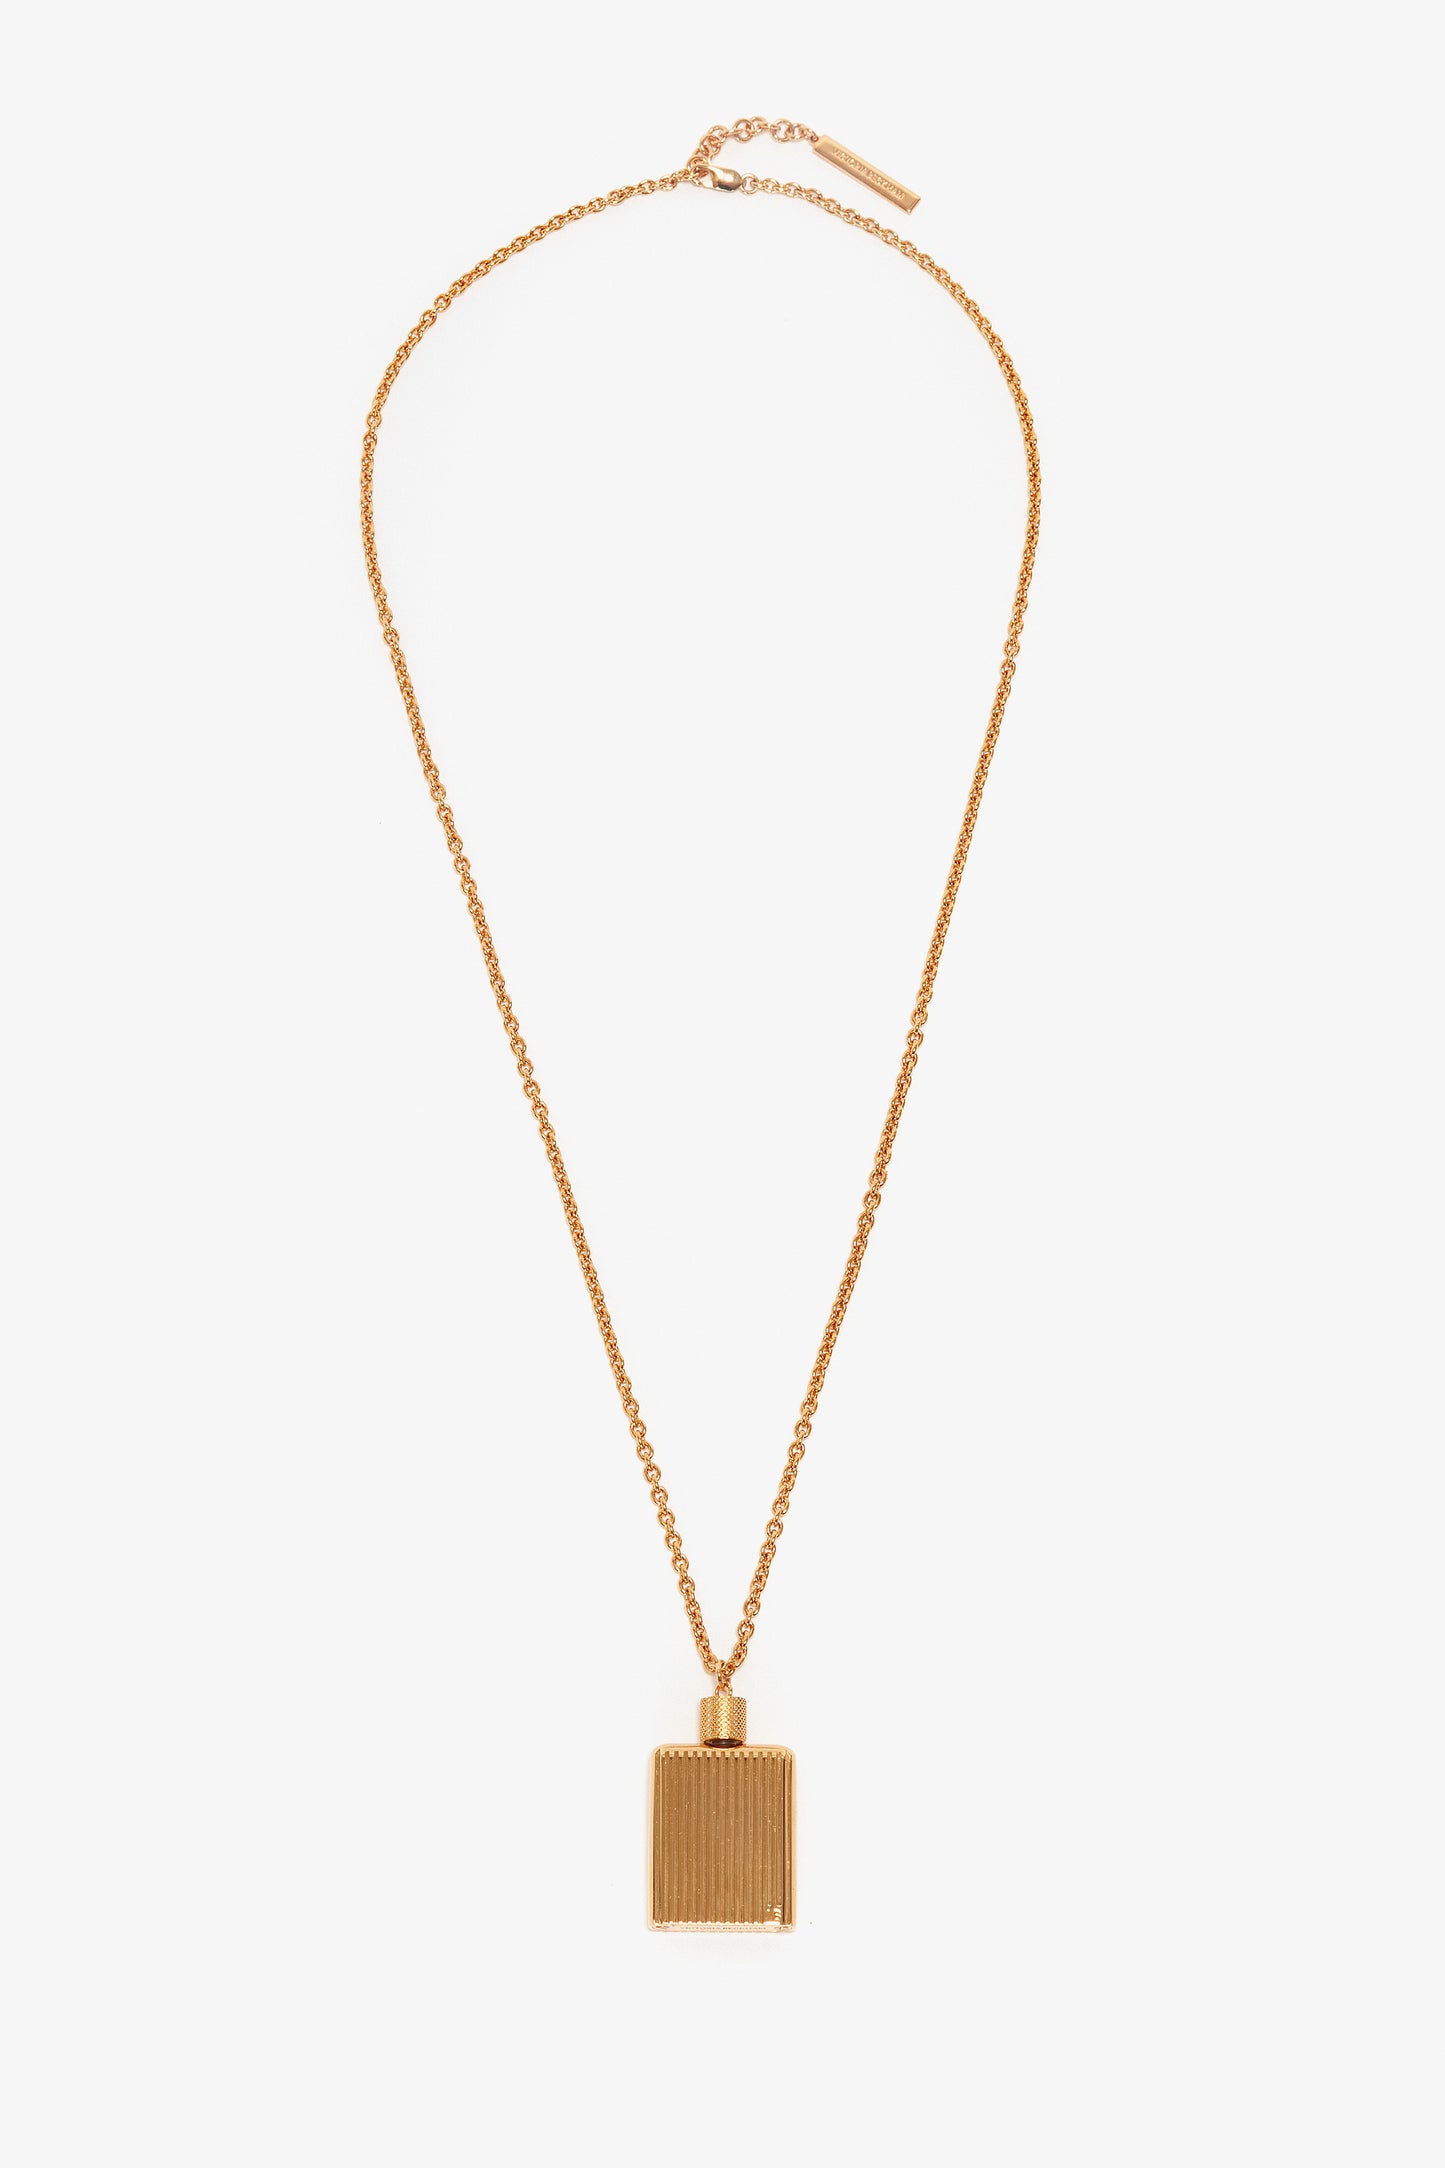 Exclusive Perfume Bottle Necklace In Brushed Gold